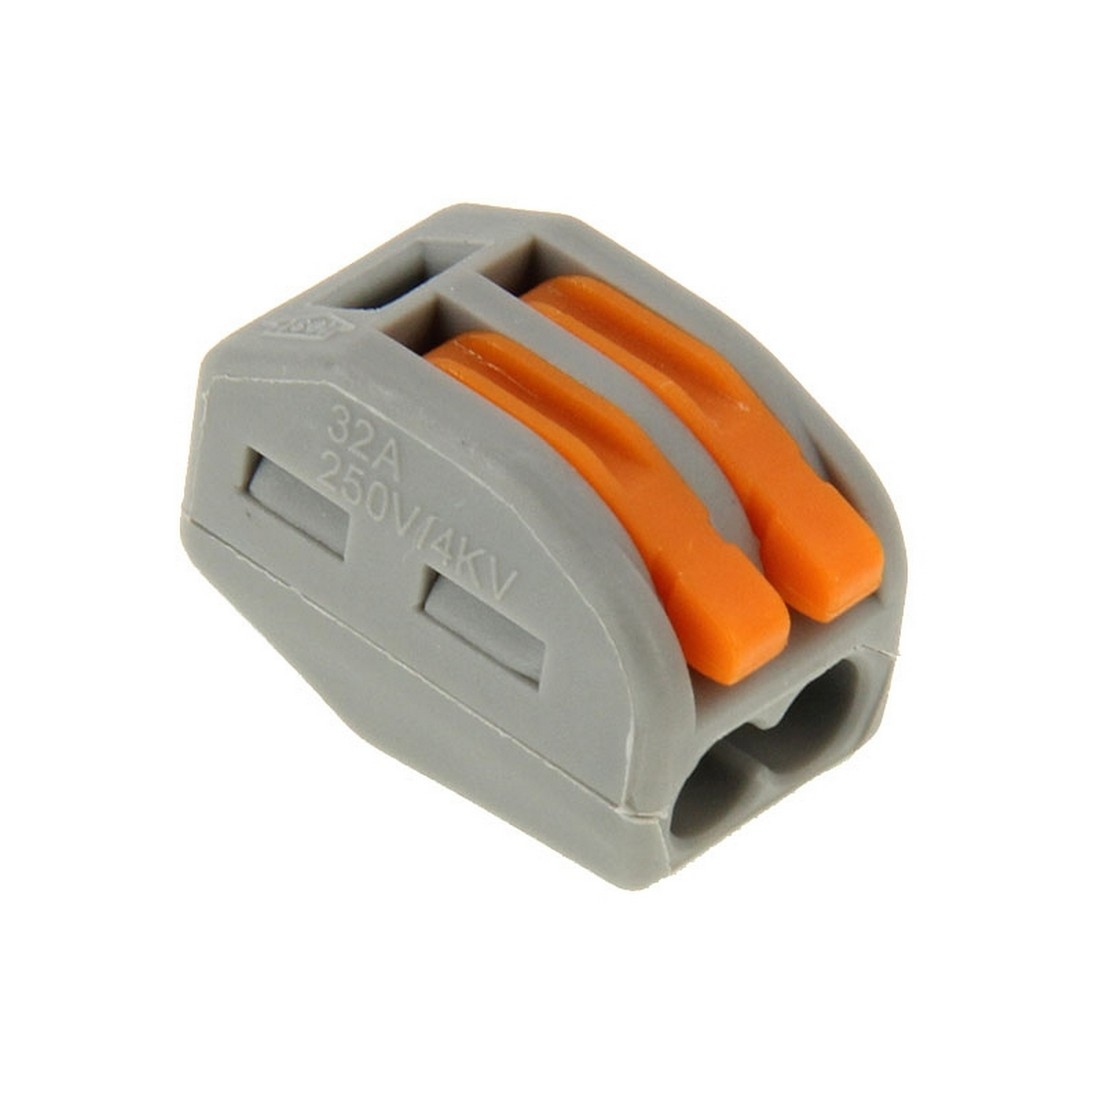 Details about   Electrical Connectors Wire Block Clamp Terminal Cable 12V 240V Reusable 2 Way UK 